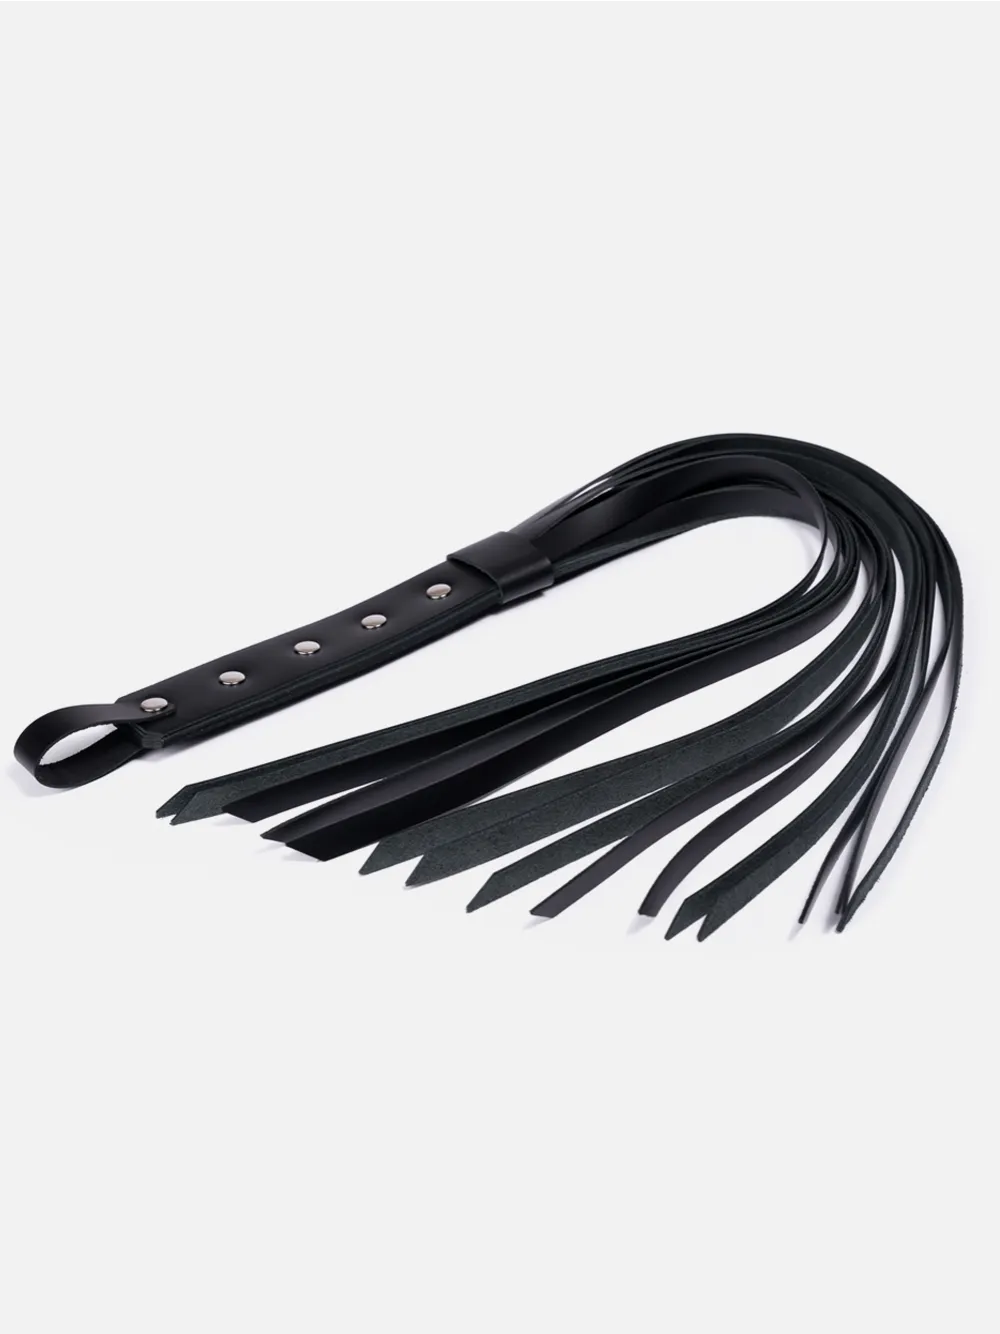 Trouble maker black leather whip, handmade from strips of genuine leather.